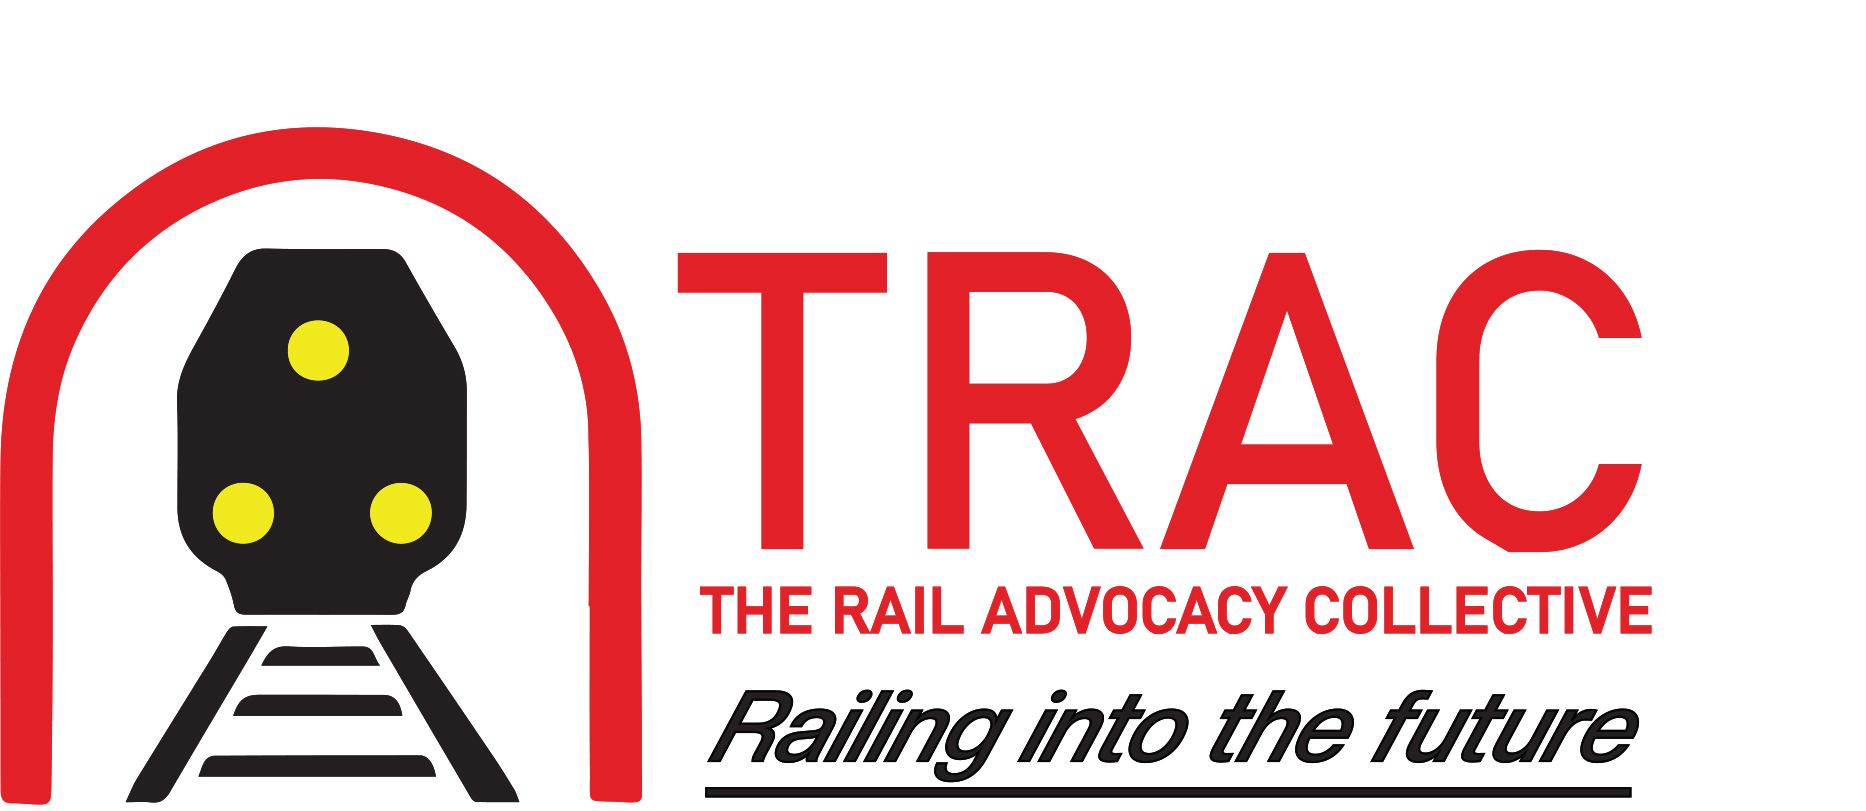 Thumbnail image for article titled 'Press Release From The Rail Advocacy Collective'